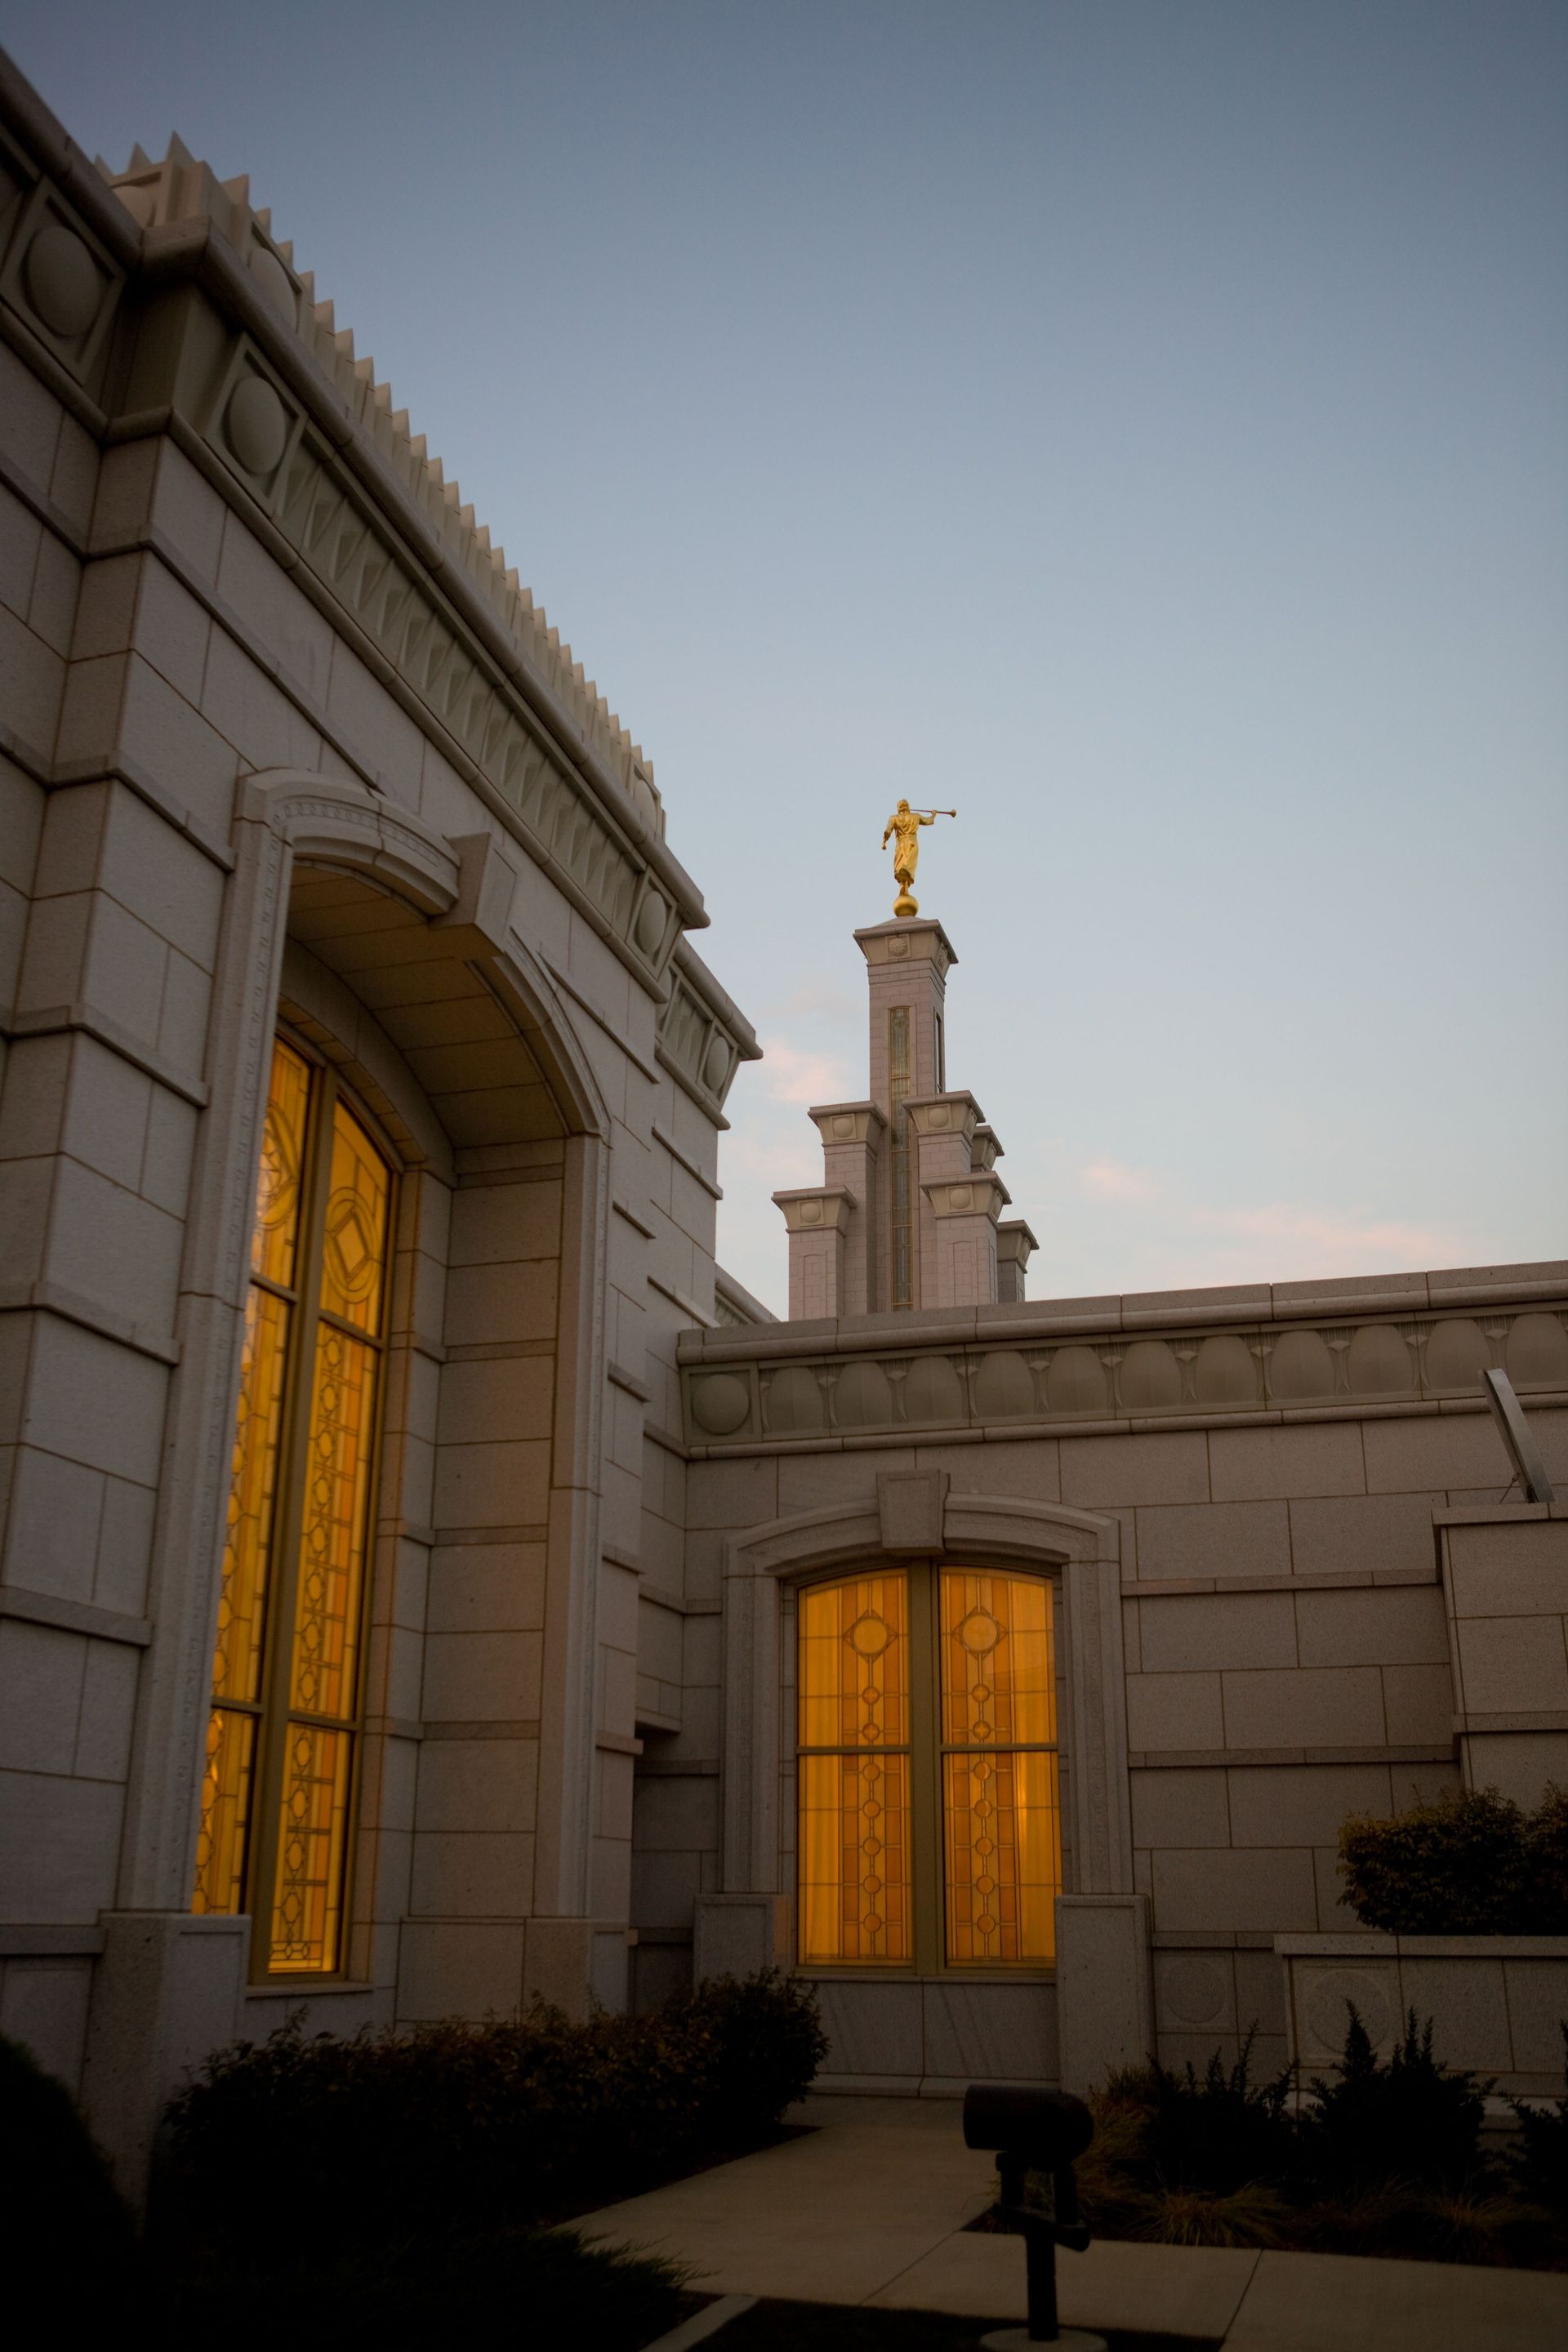 The windows on the side of the Columbia River Washington Temple show lights on within in the late evening.